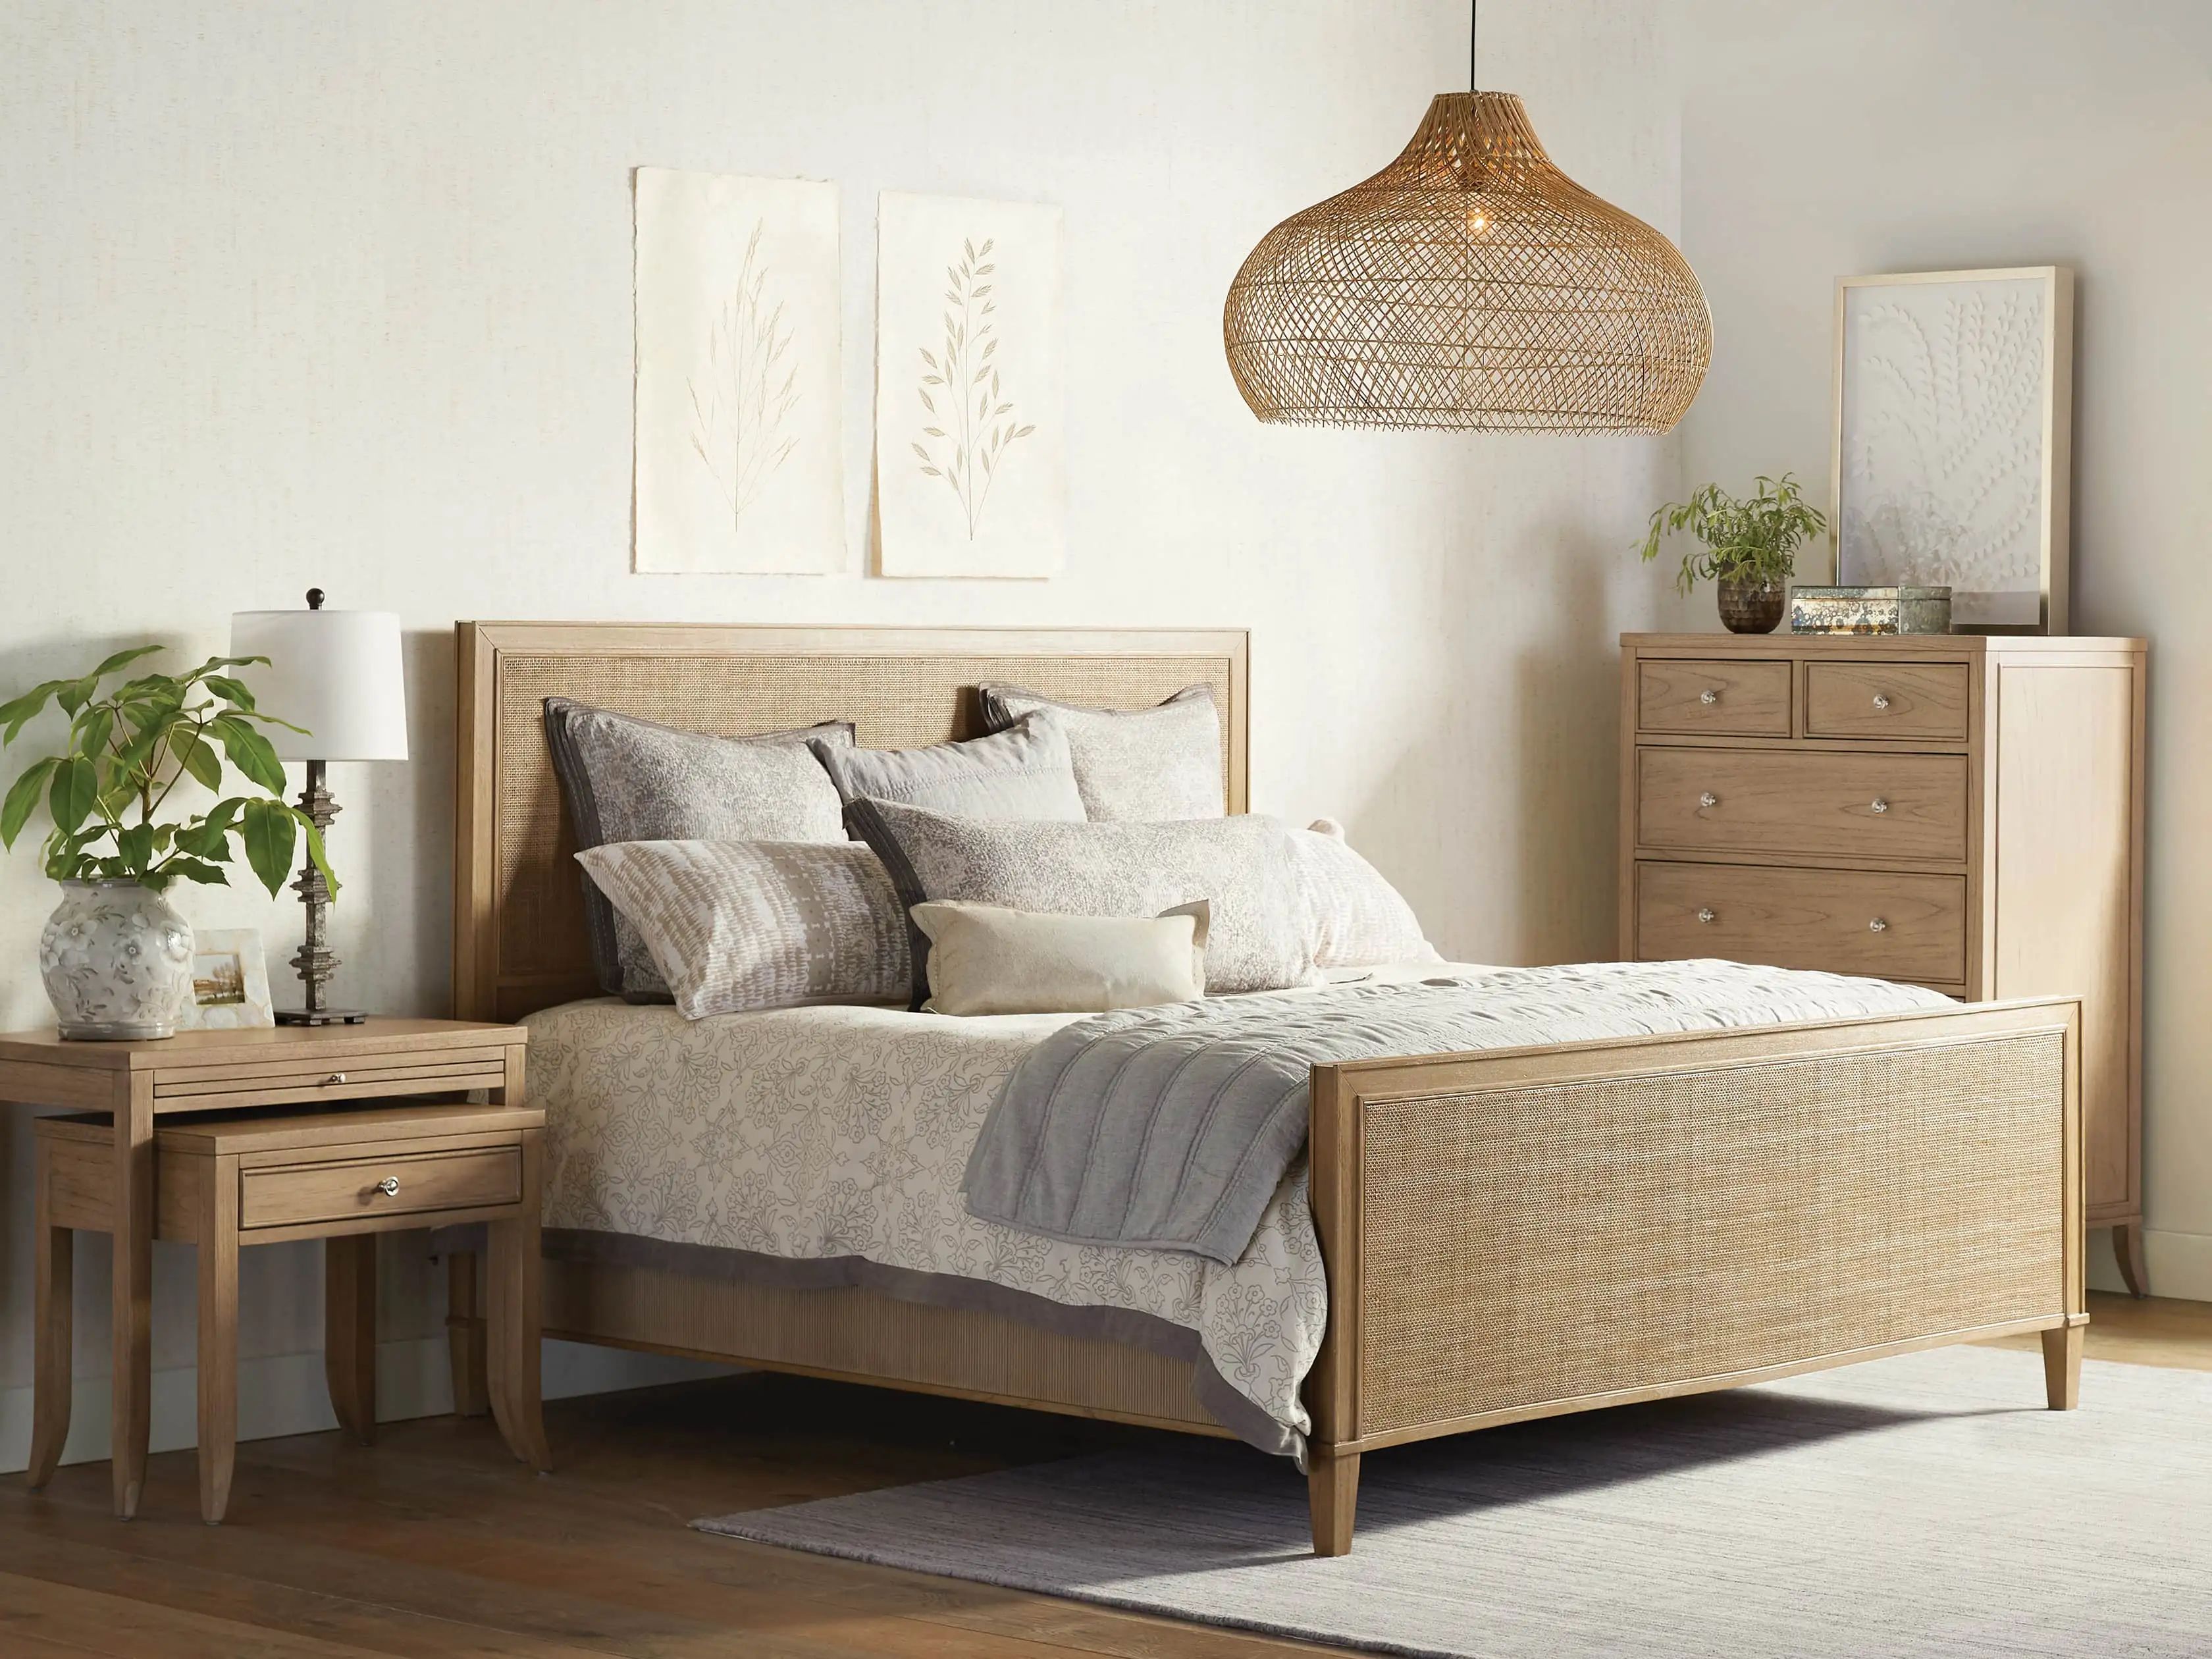 Pearson Gallery Cane Bed | Arhaus